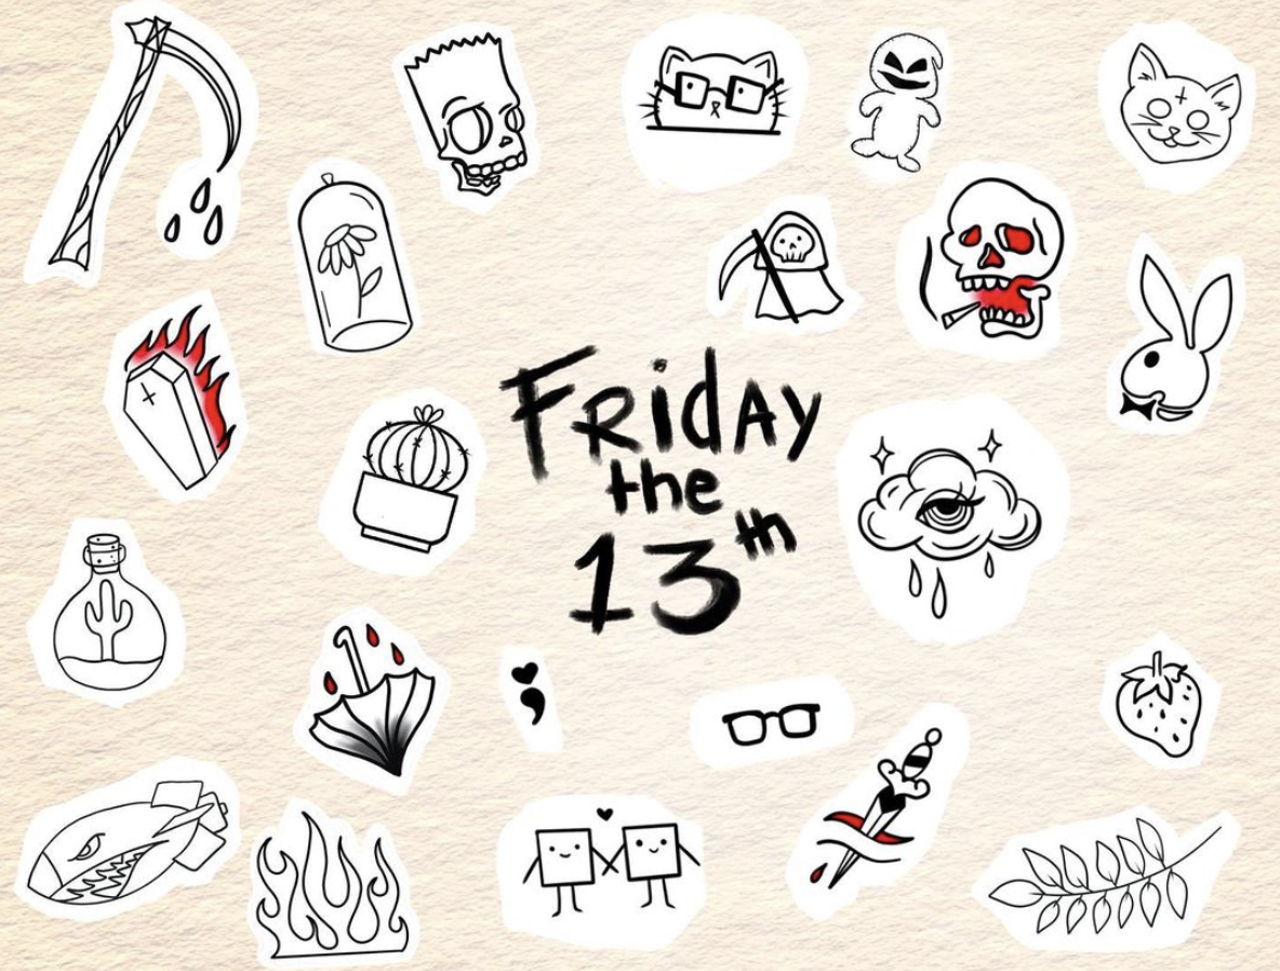 These San Antonio tattoo parlors are offering Friday the 13th deals  San  Antonio  San Antonio Current